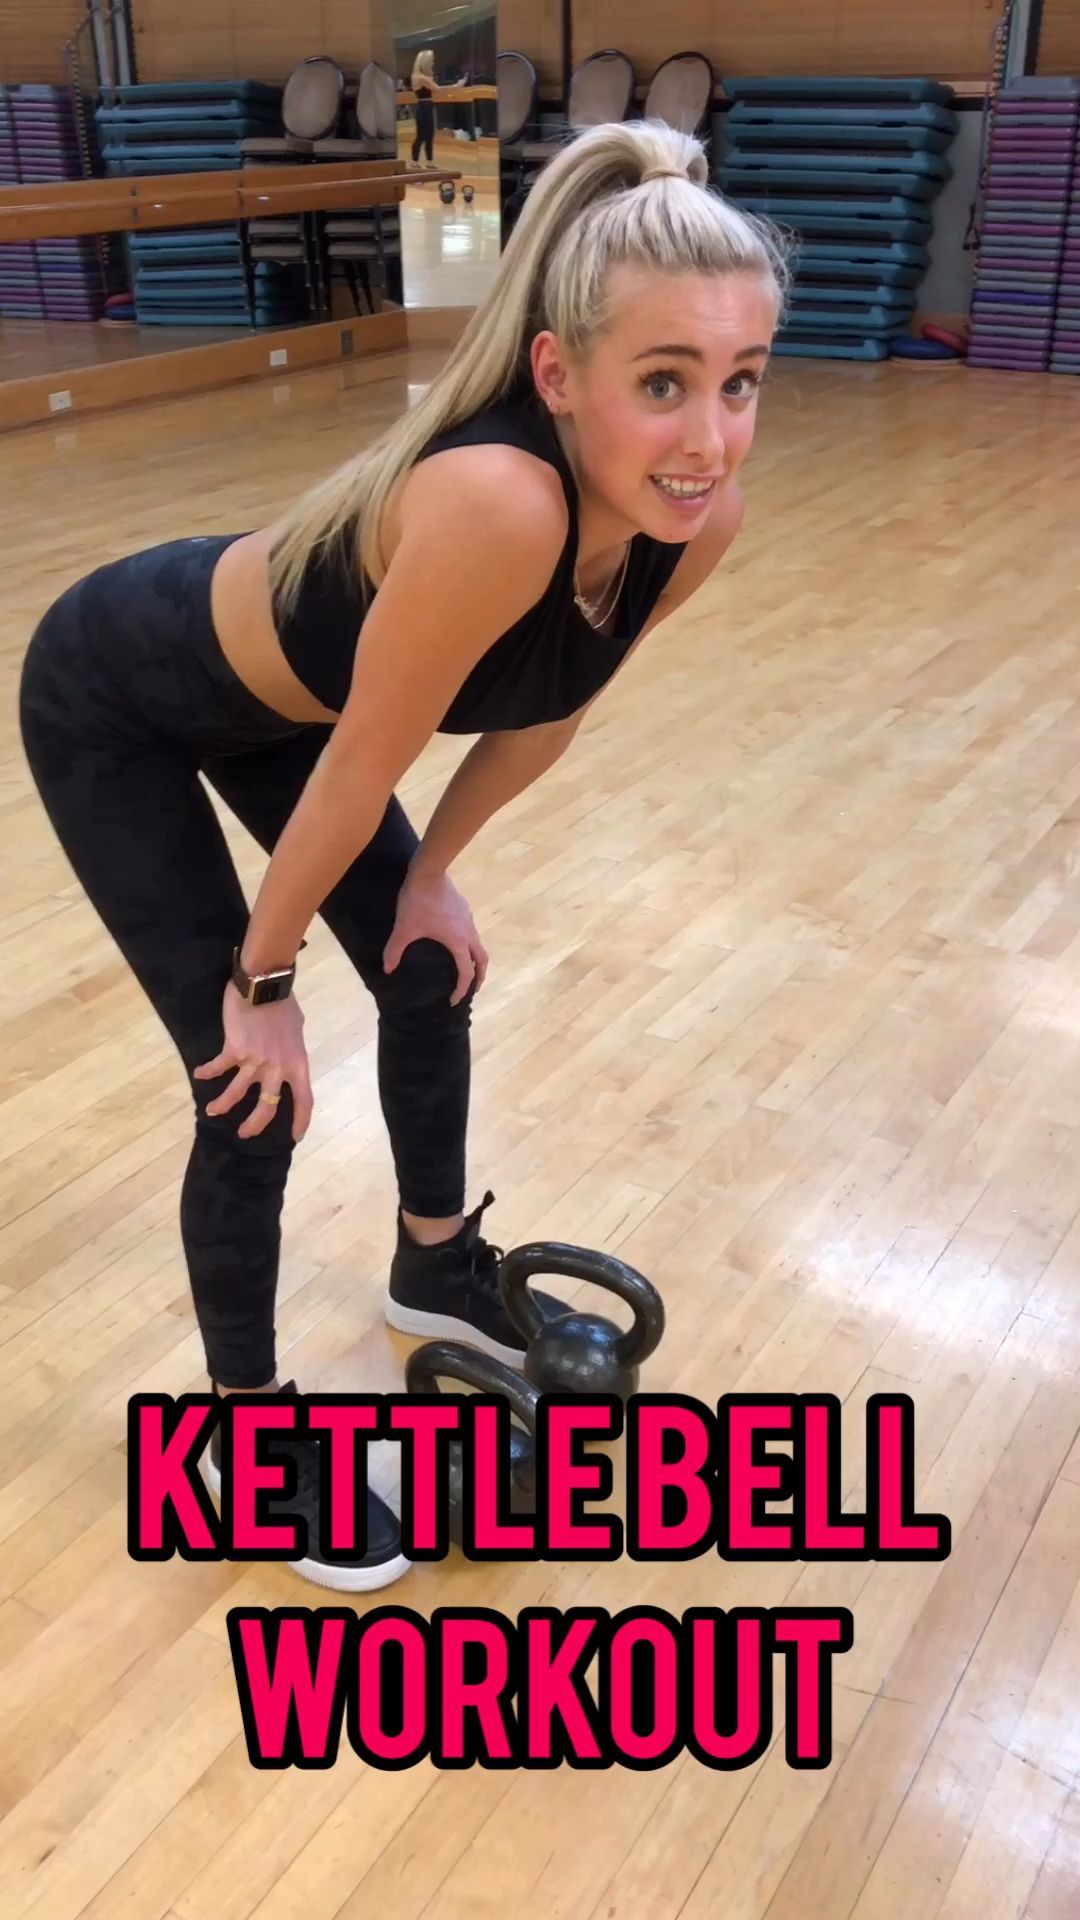 Full Body Kettlebell Workout - Full Body Kettlebell Workout -   19 fitness Quotes videos ideas